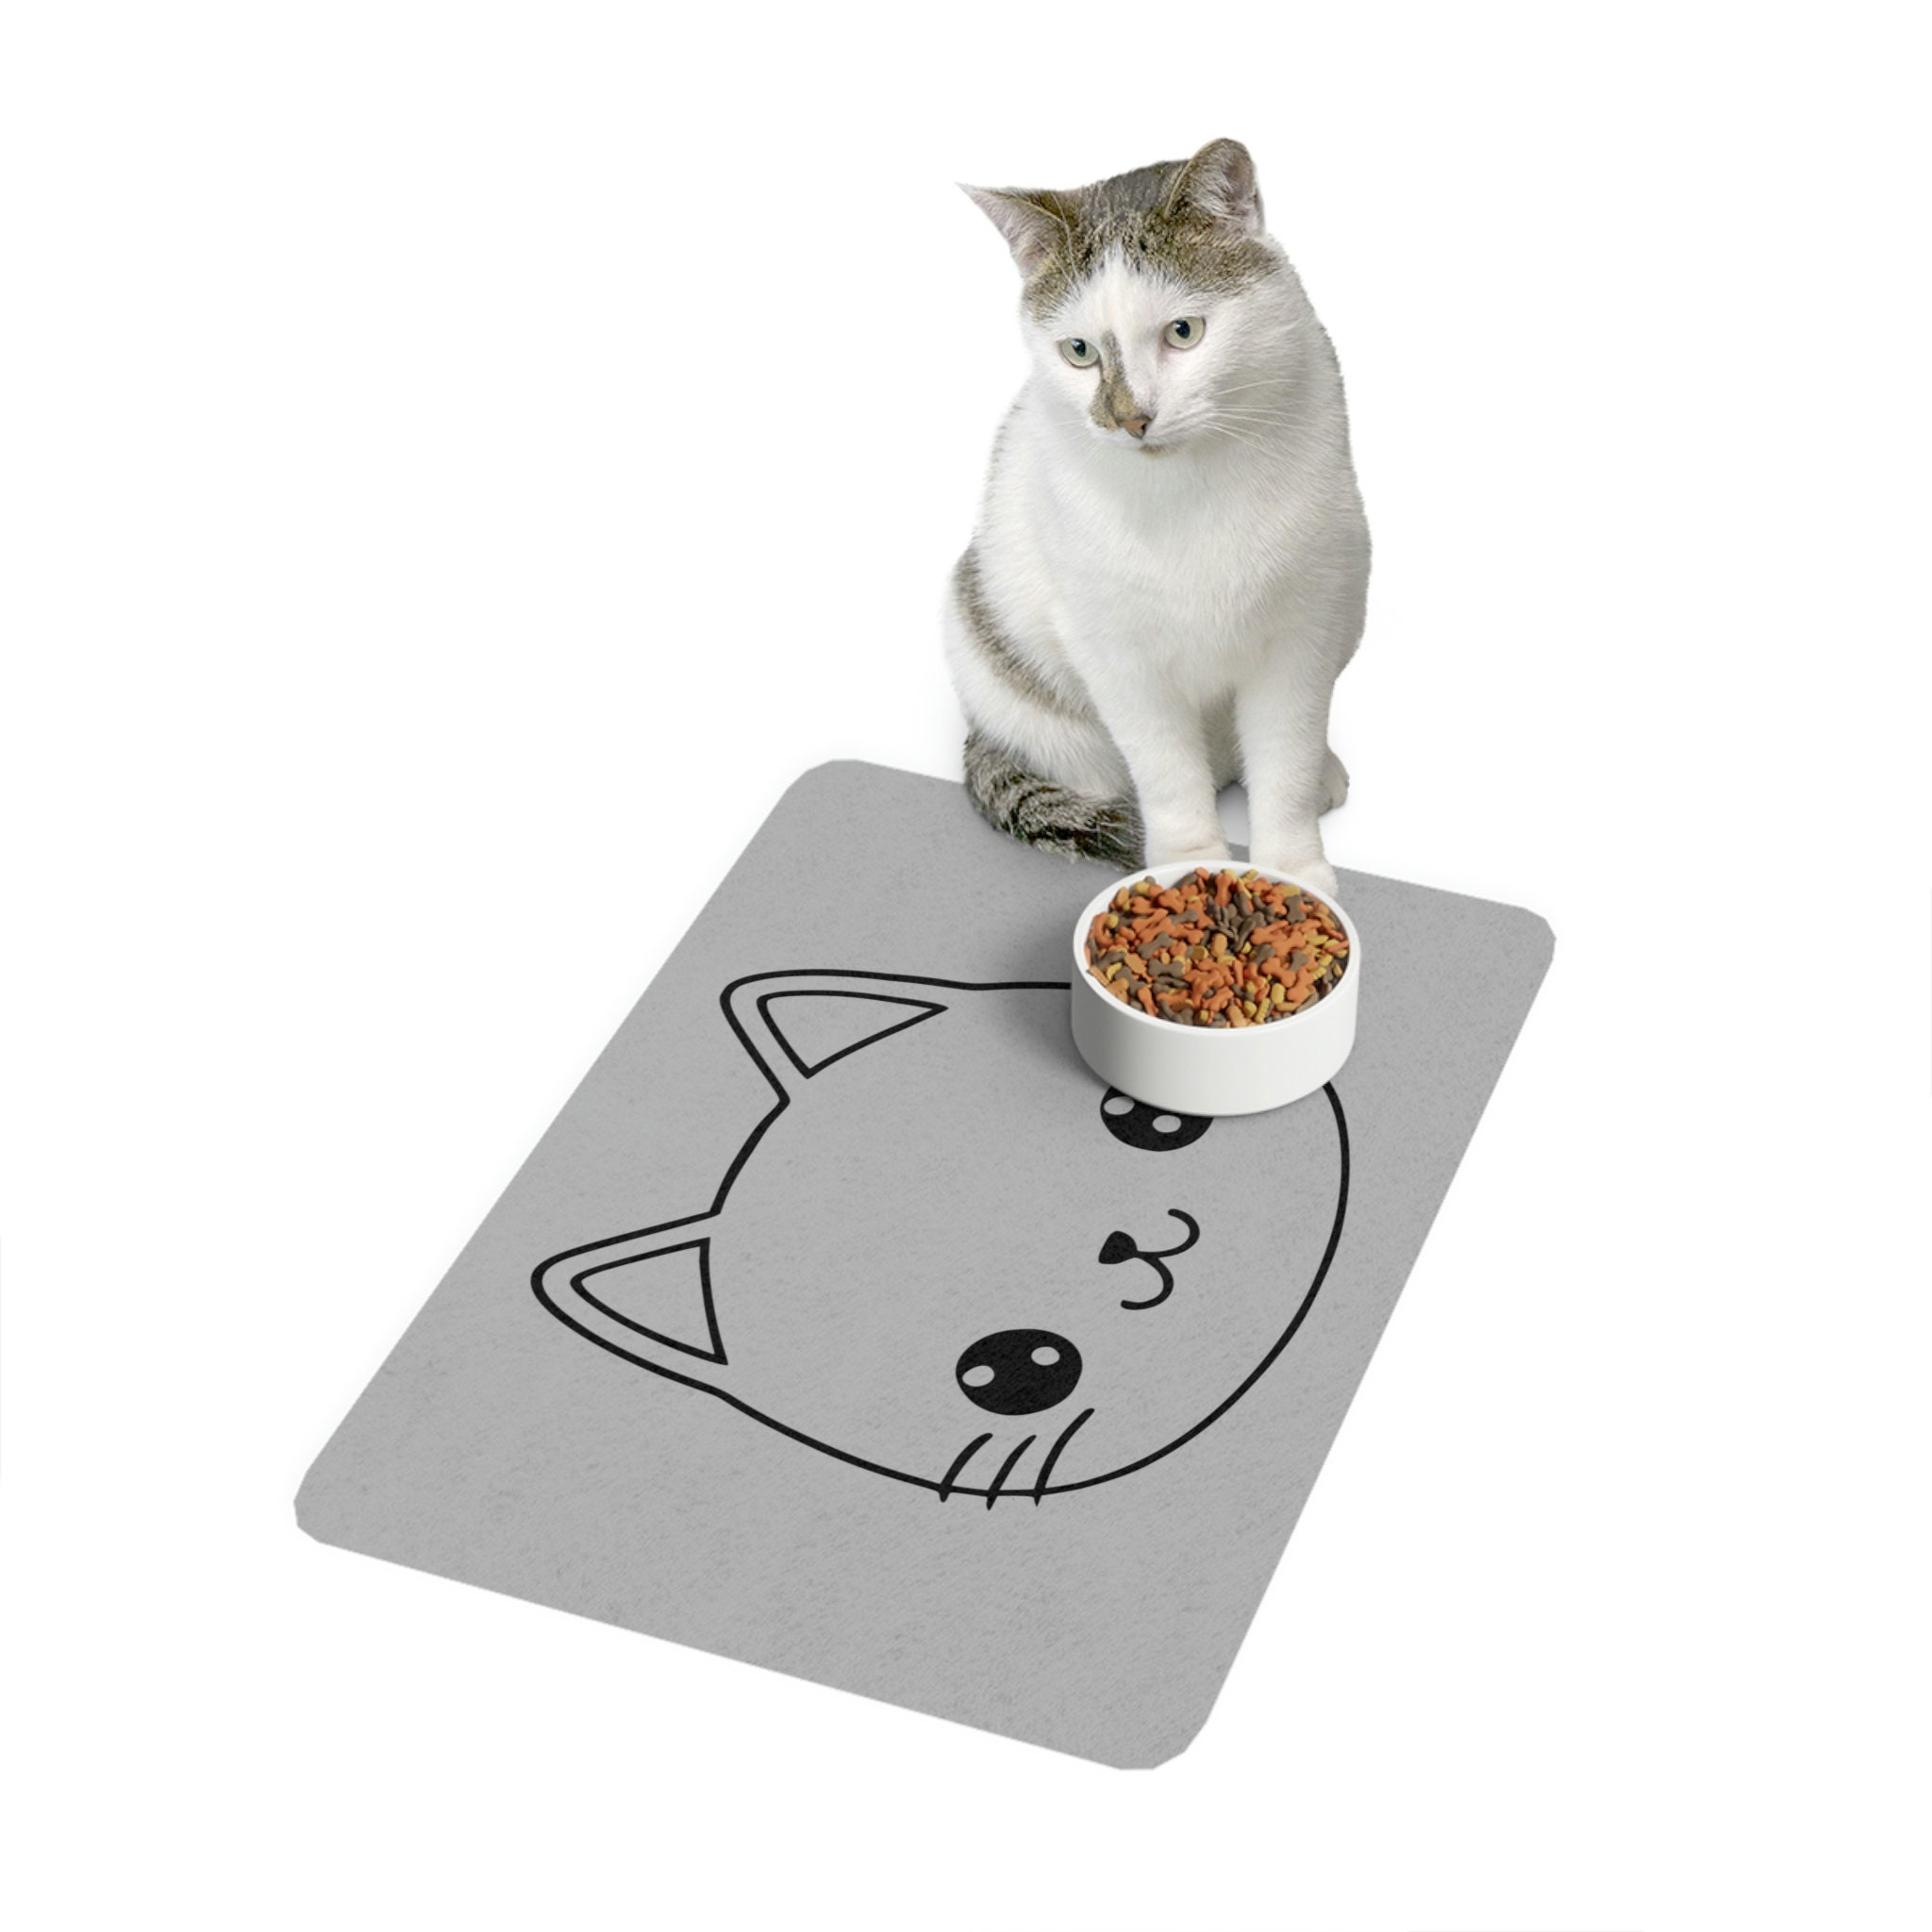 Kawaii Kitty food/water bowl mat - cute cat lover gift, puppy litter  pad,dog accessories,cat doormat/placemat,washable pet bed, new pet idea